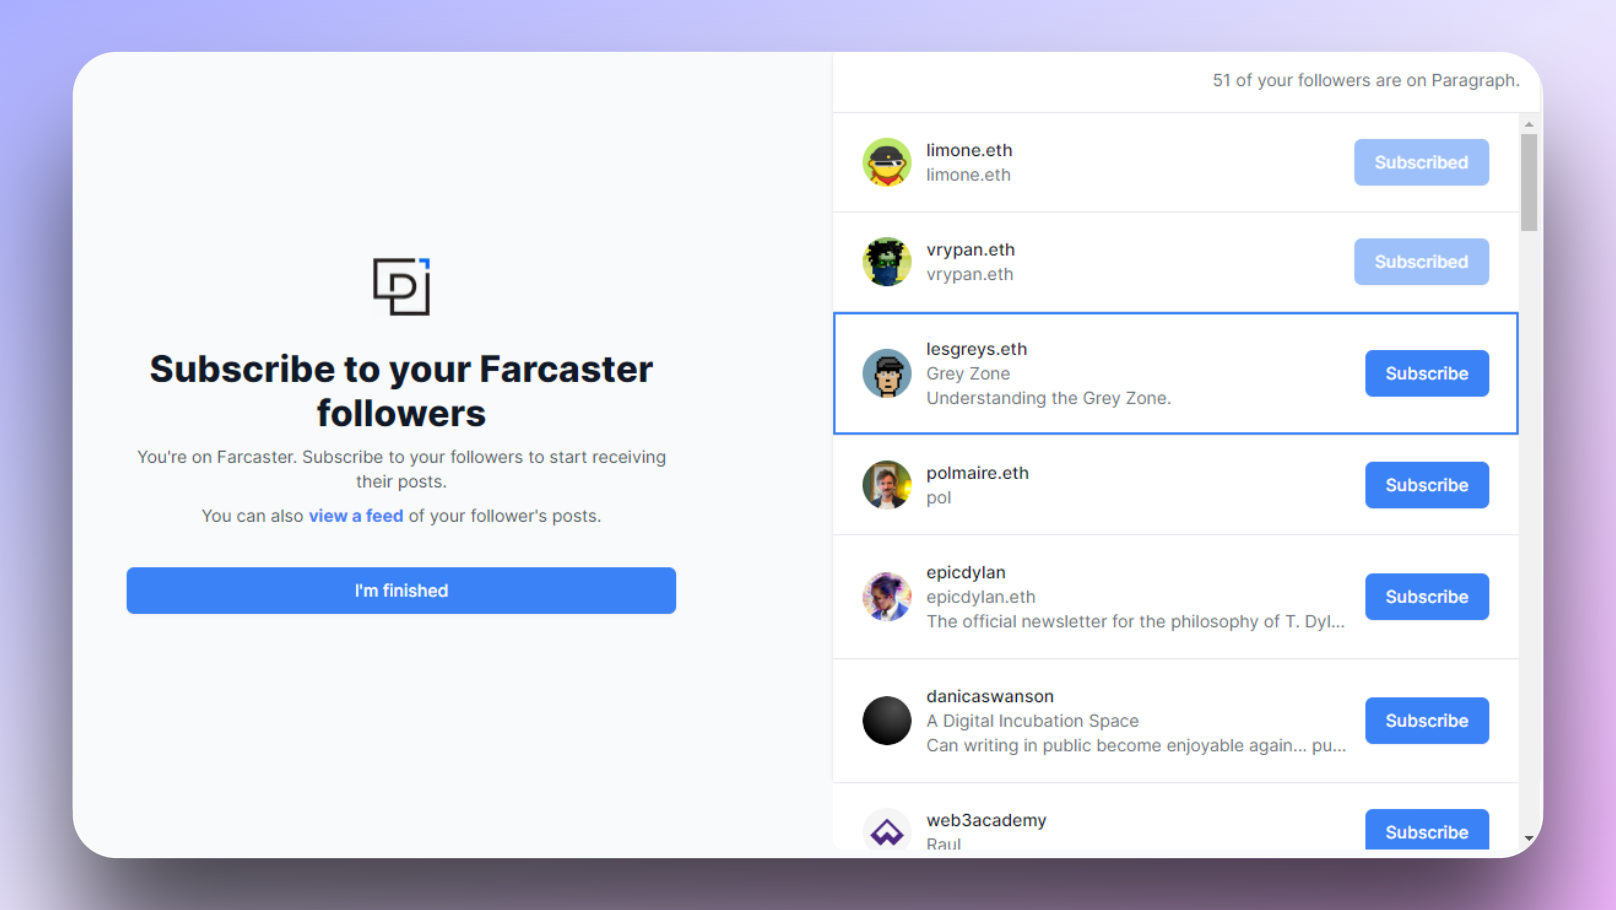 The Paragraph onboarding flow suggests subscribing to your FC followers